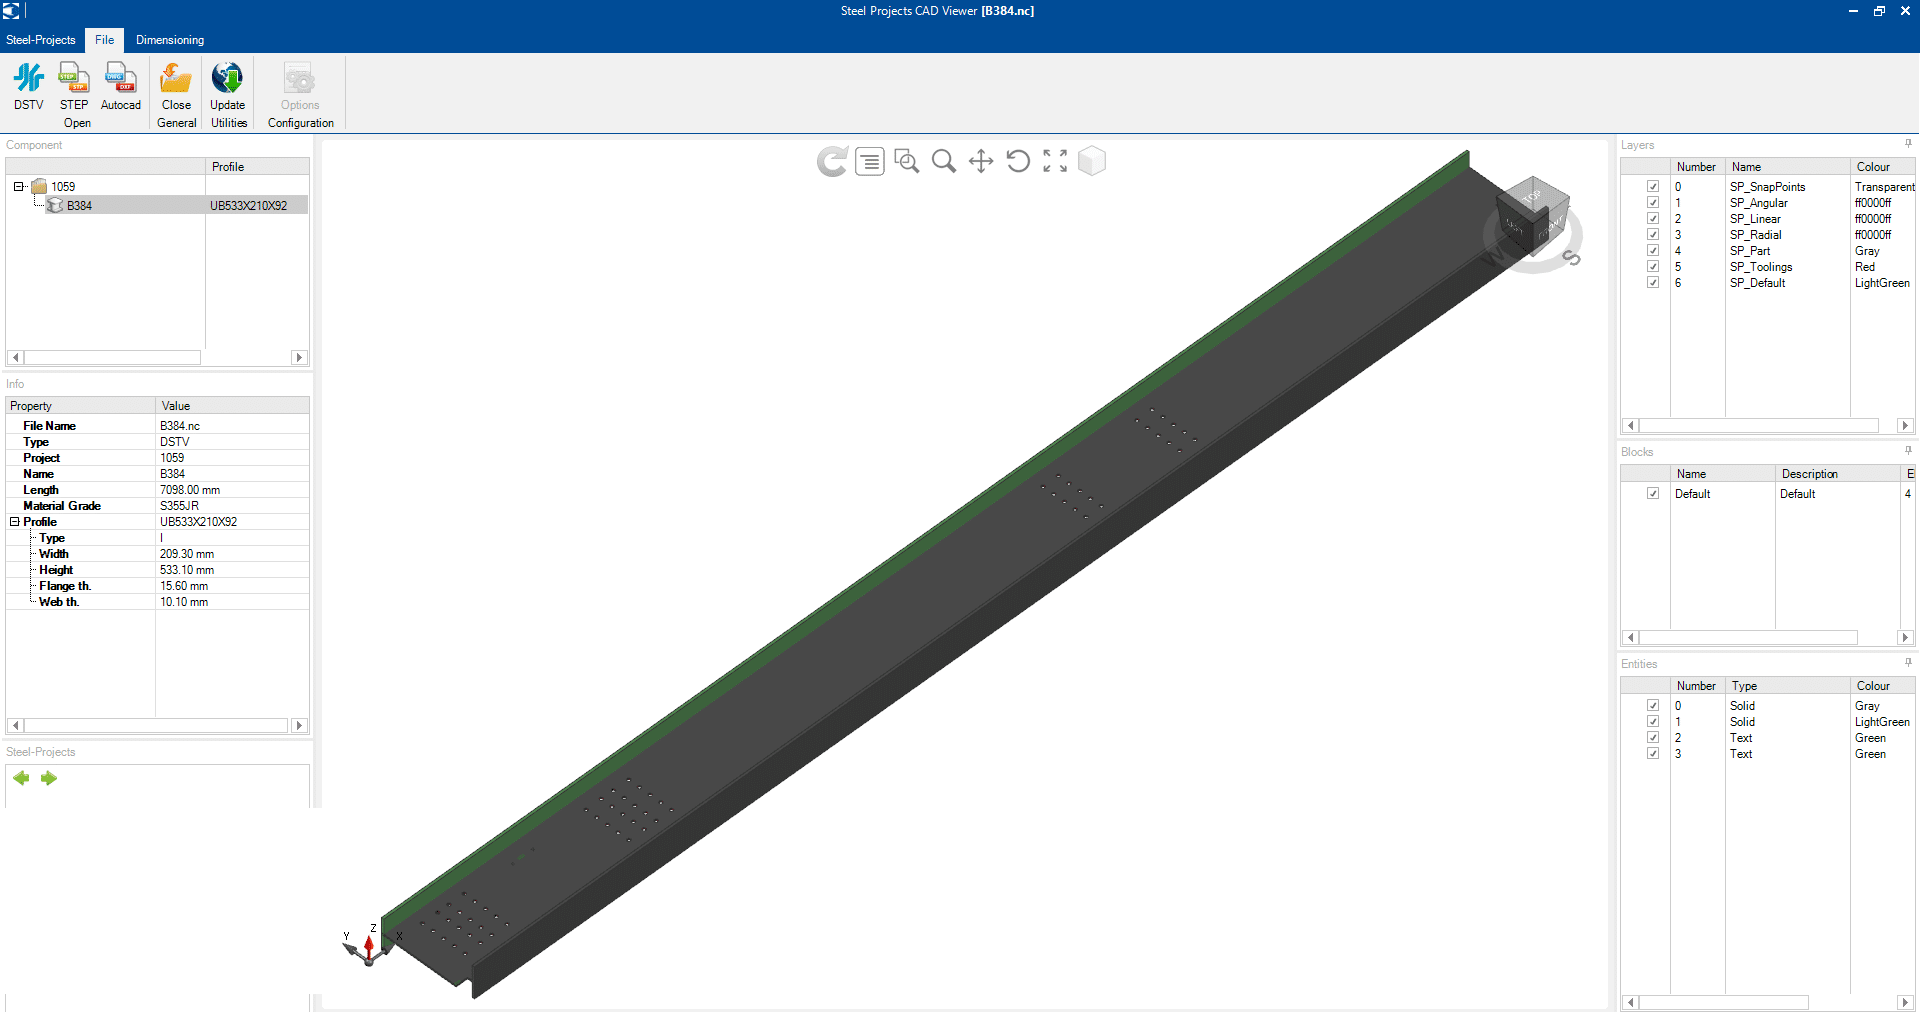 Screenshot of CAD Viewer by Steel Projects